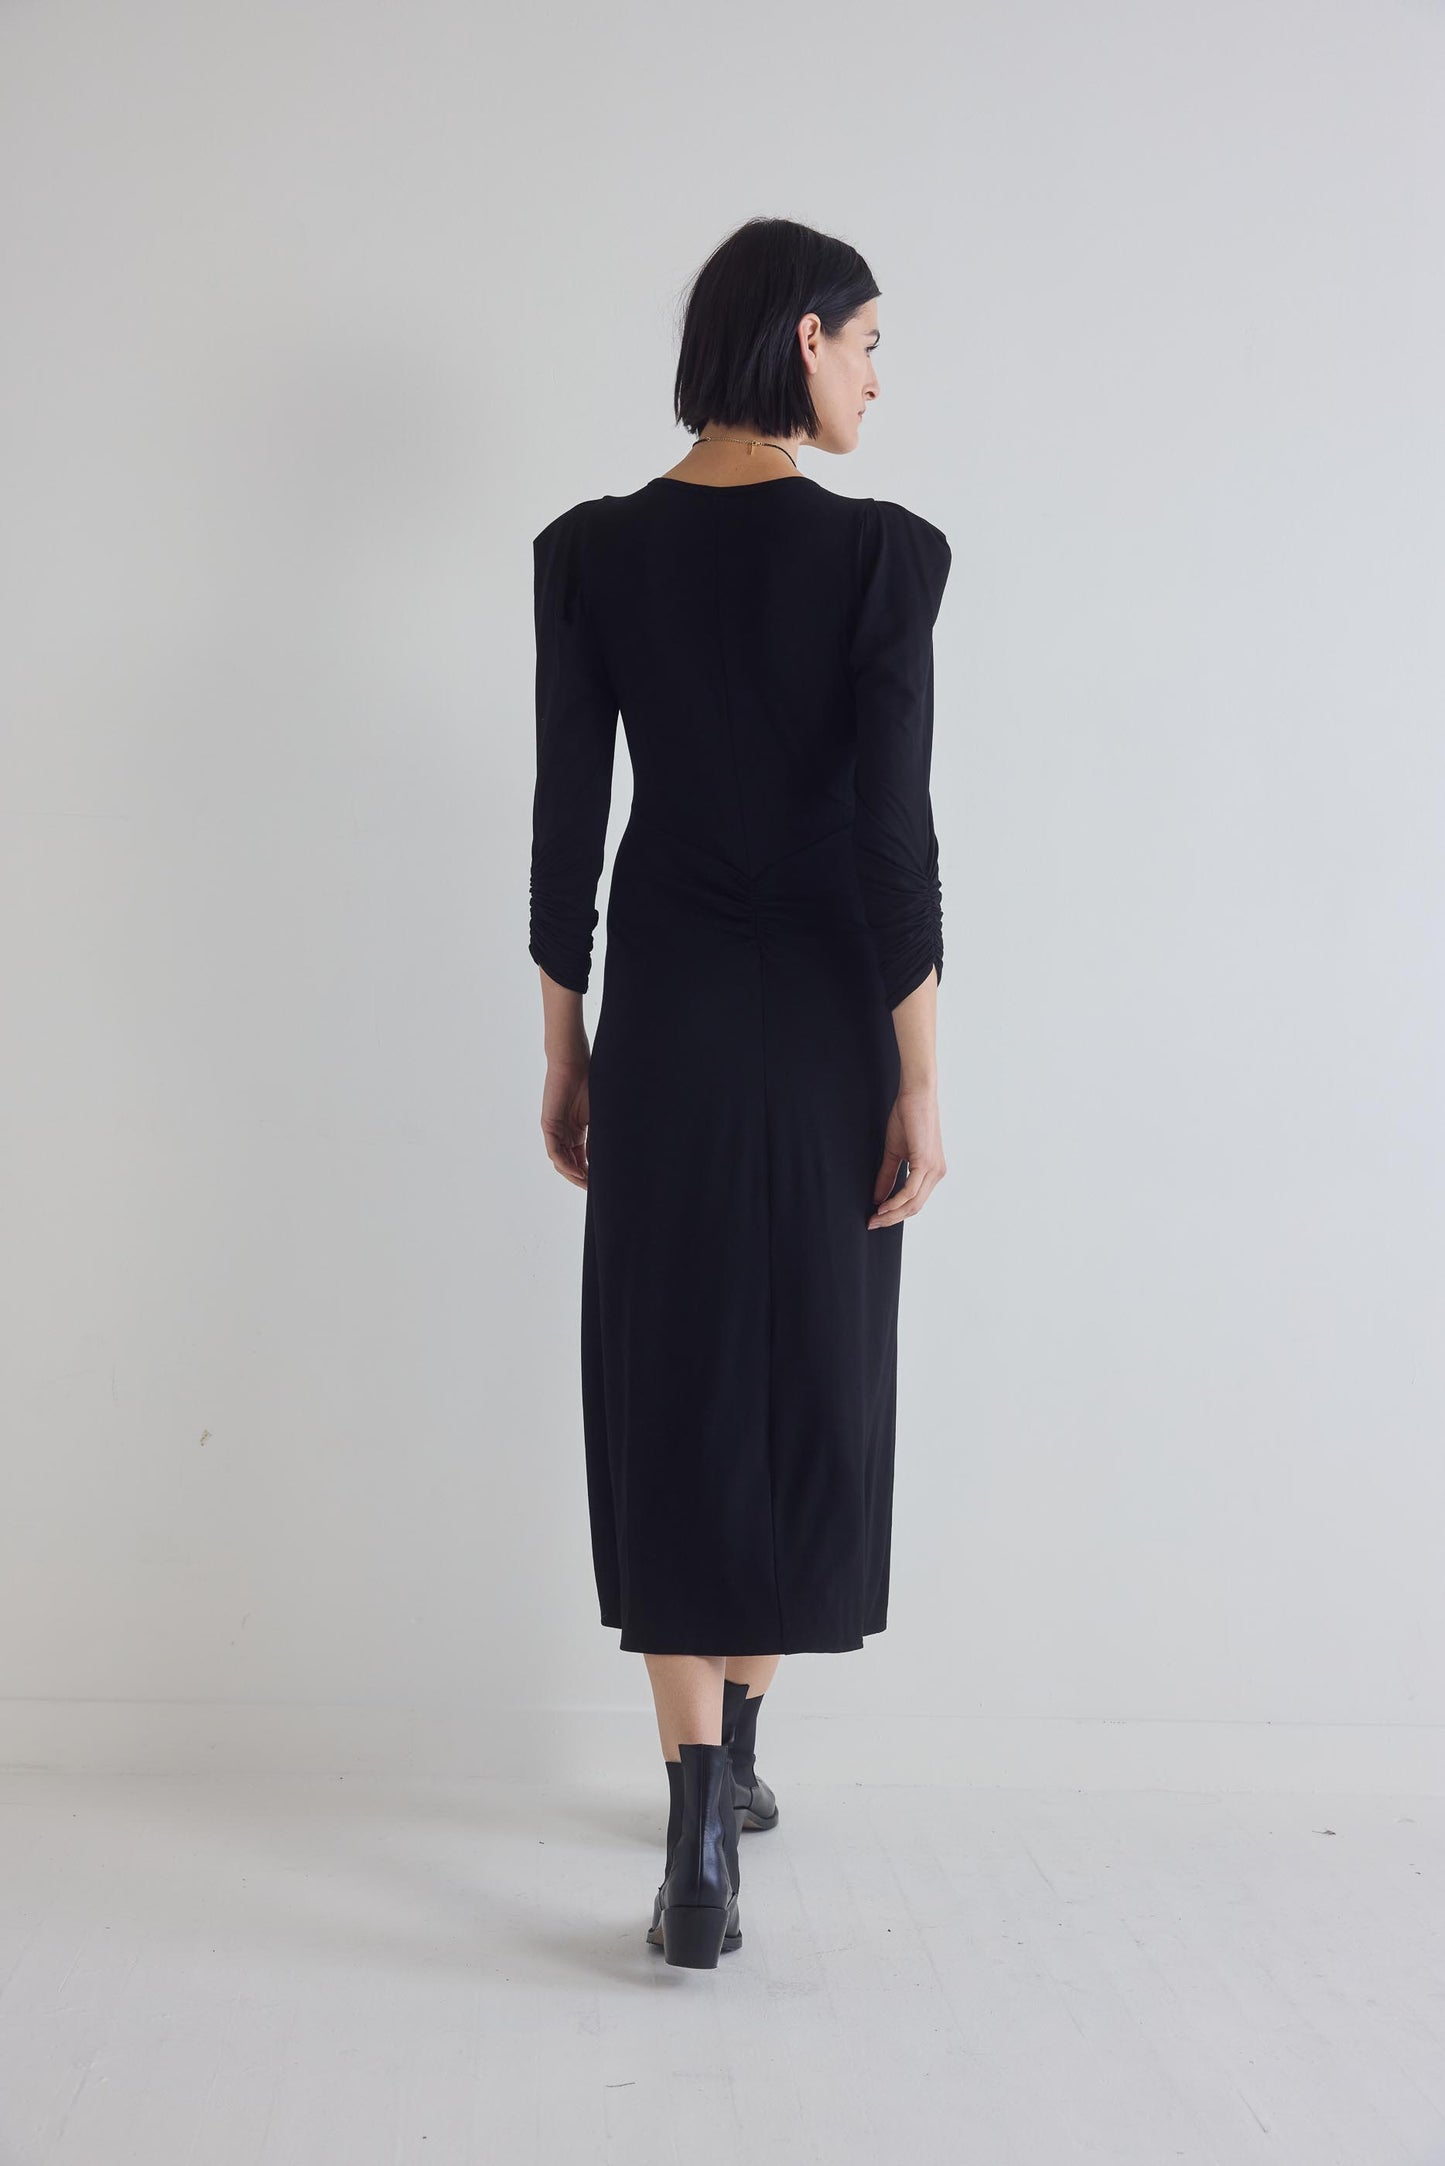 The Rouched Jersey Dress